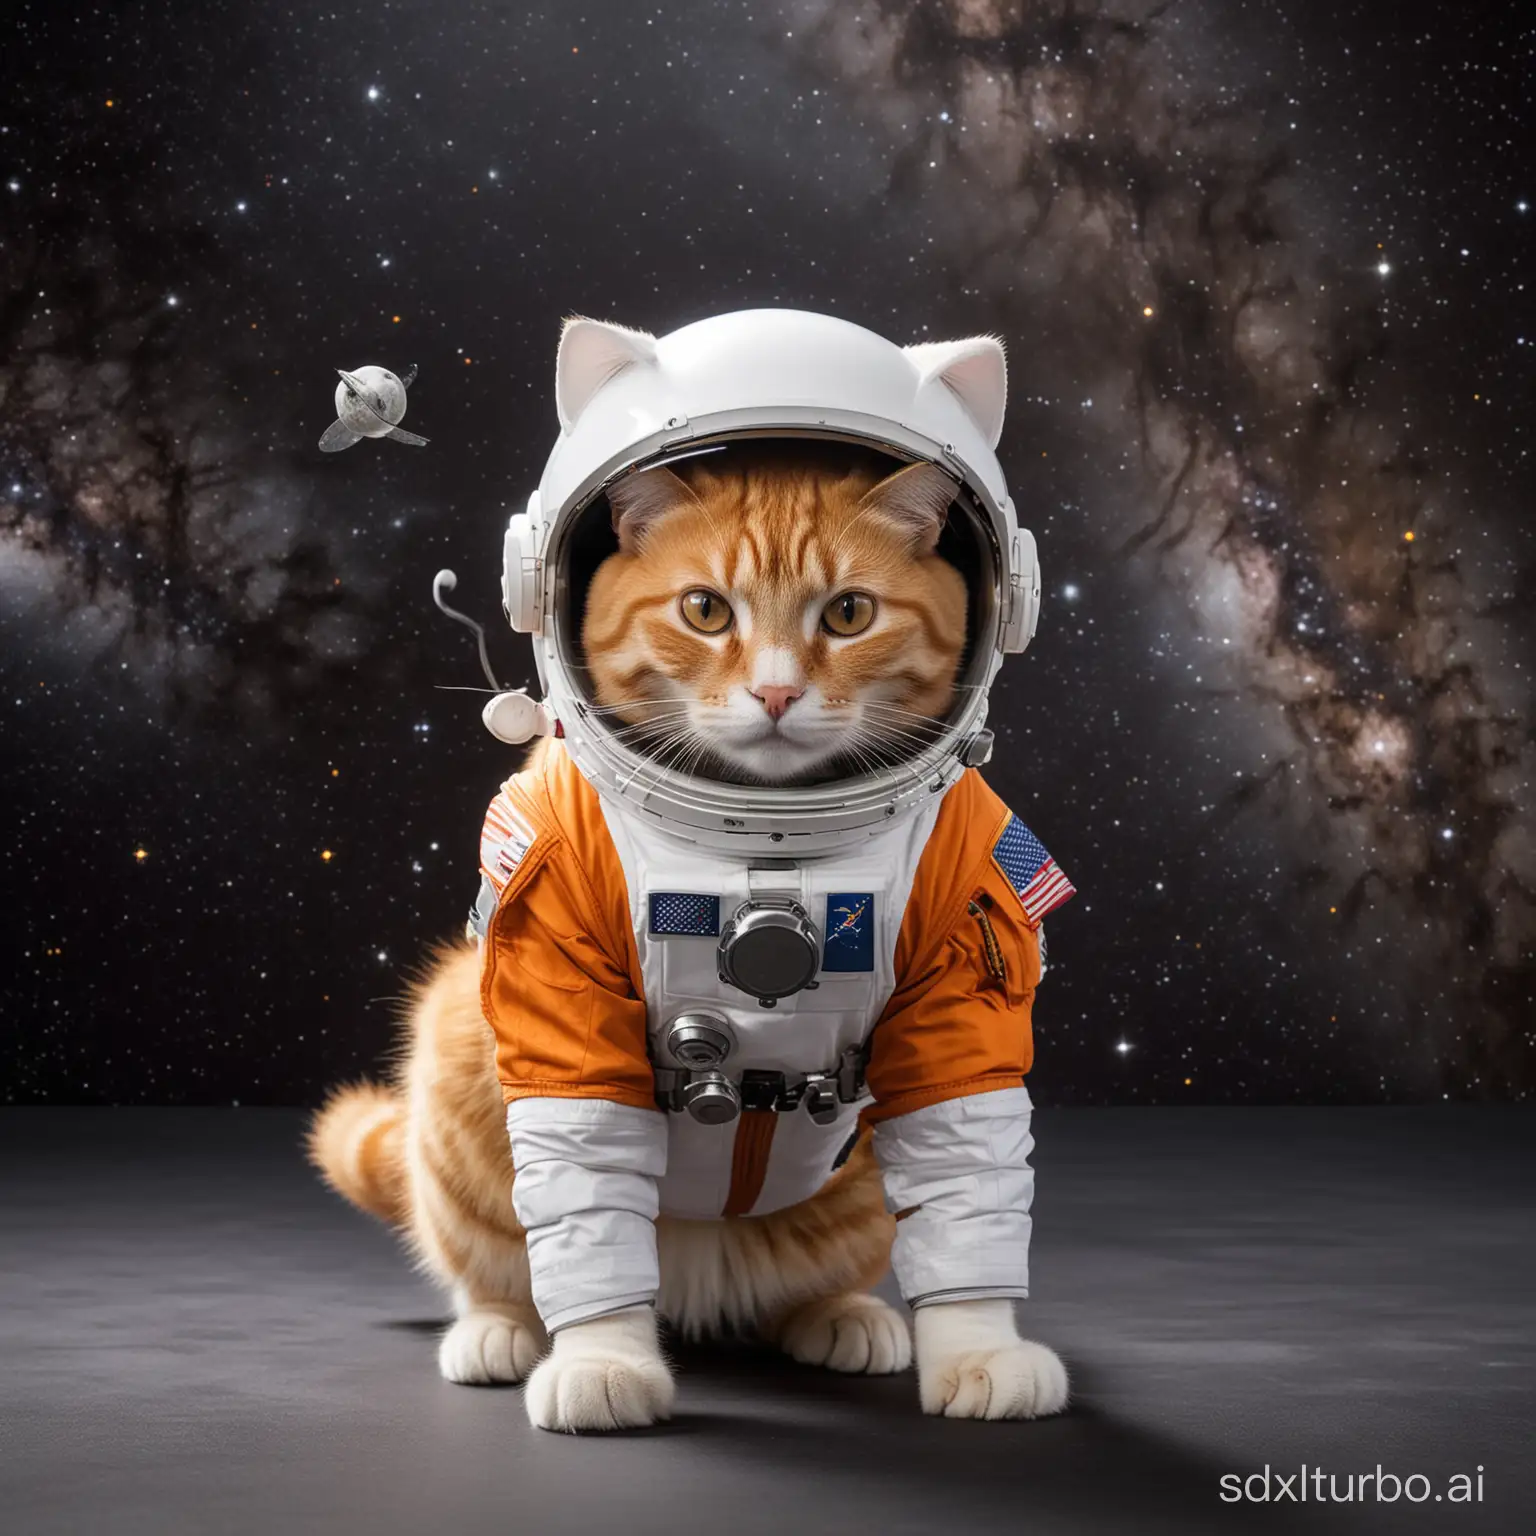 Orange-Feline-Astronaut-with-Striped-Tail-on-a-Rocket-in-Deep-Space